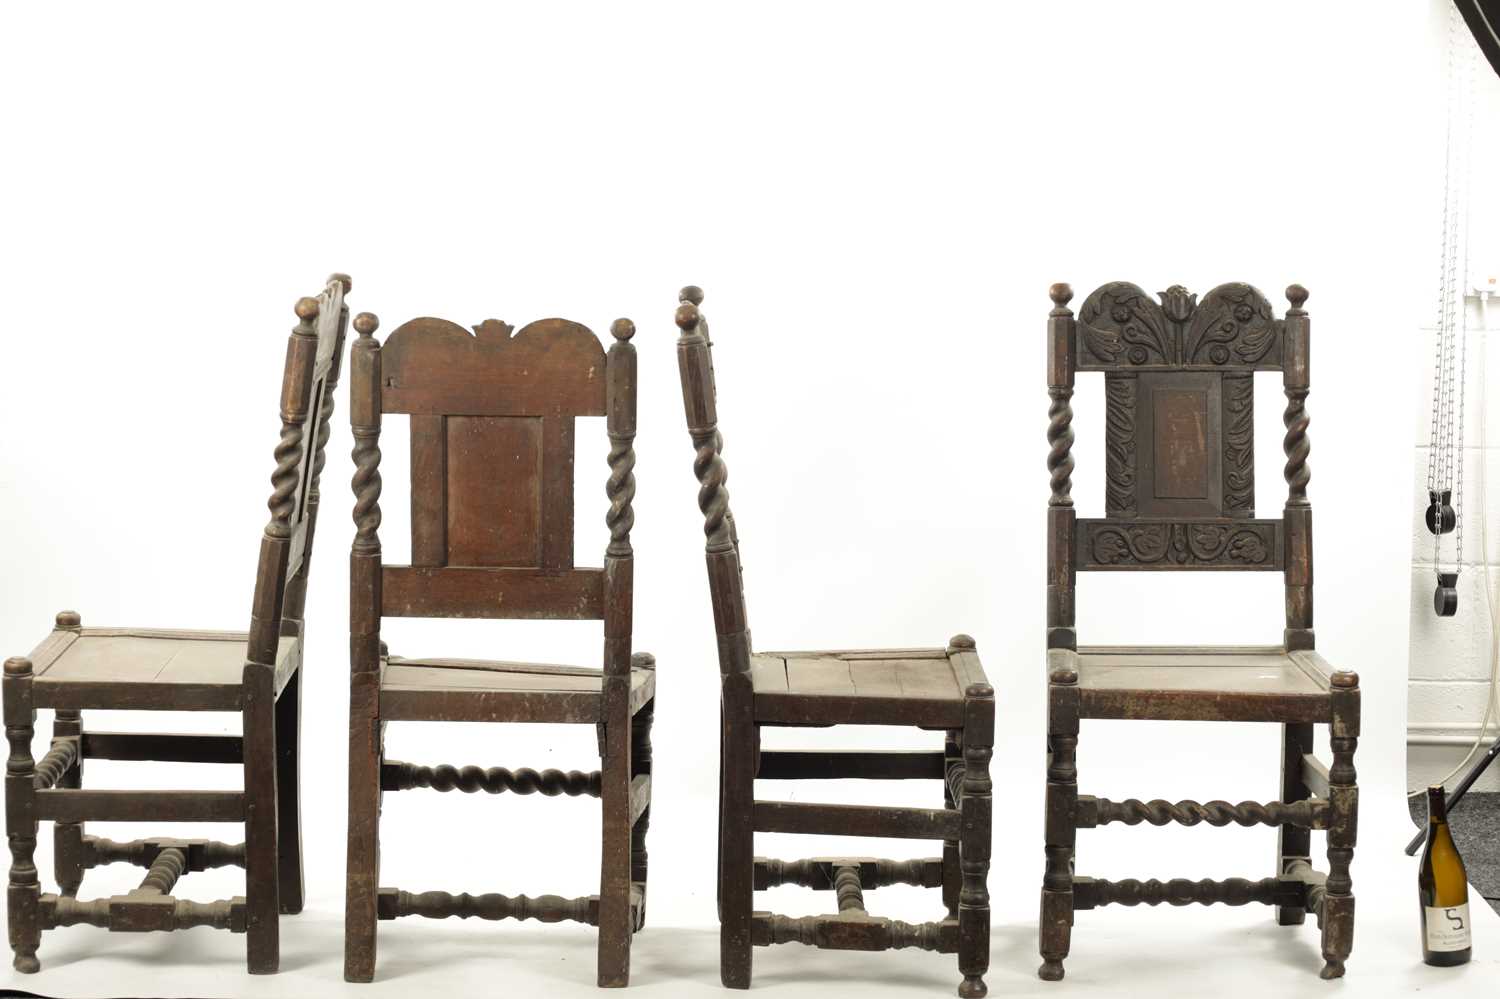 A RARE SET OF FOUR 17TH CENTURY CARVED OAK SIDE CHAIRS - Image 6 of 10